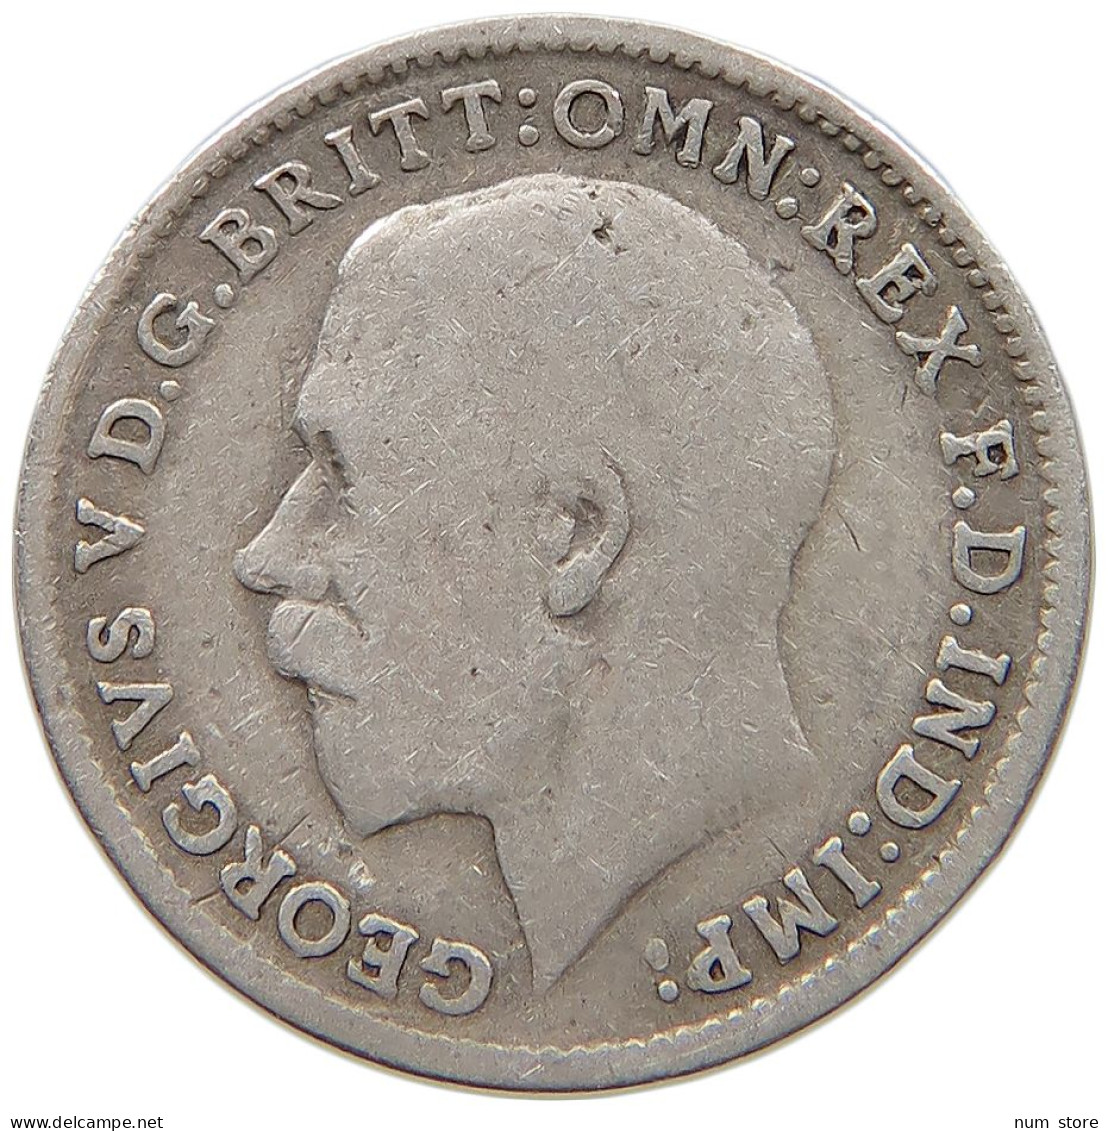 GREAT BRITAIN THREEPENCE 1916 #s059 0659 - F. 3 Pence